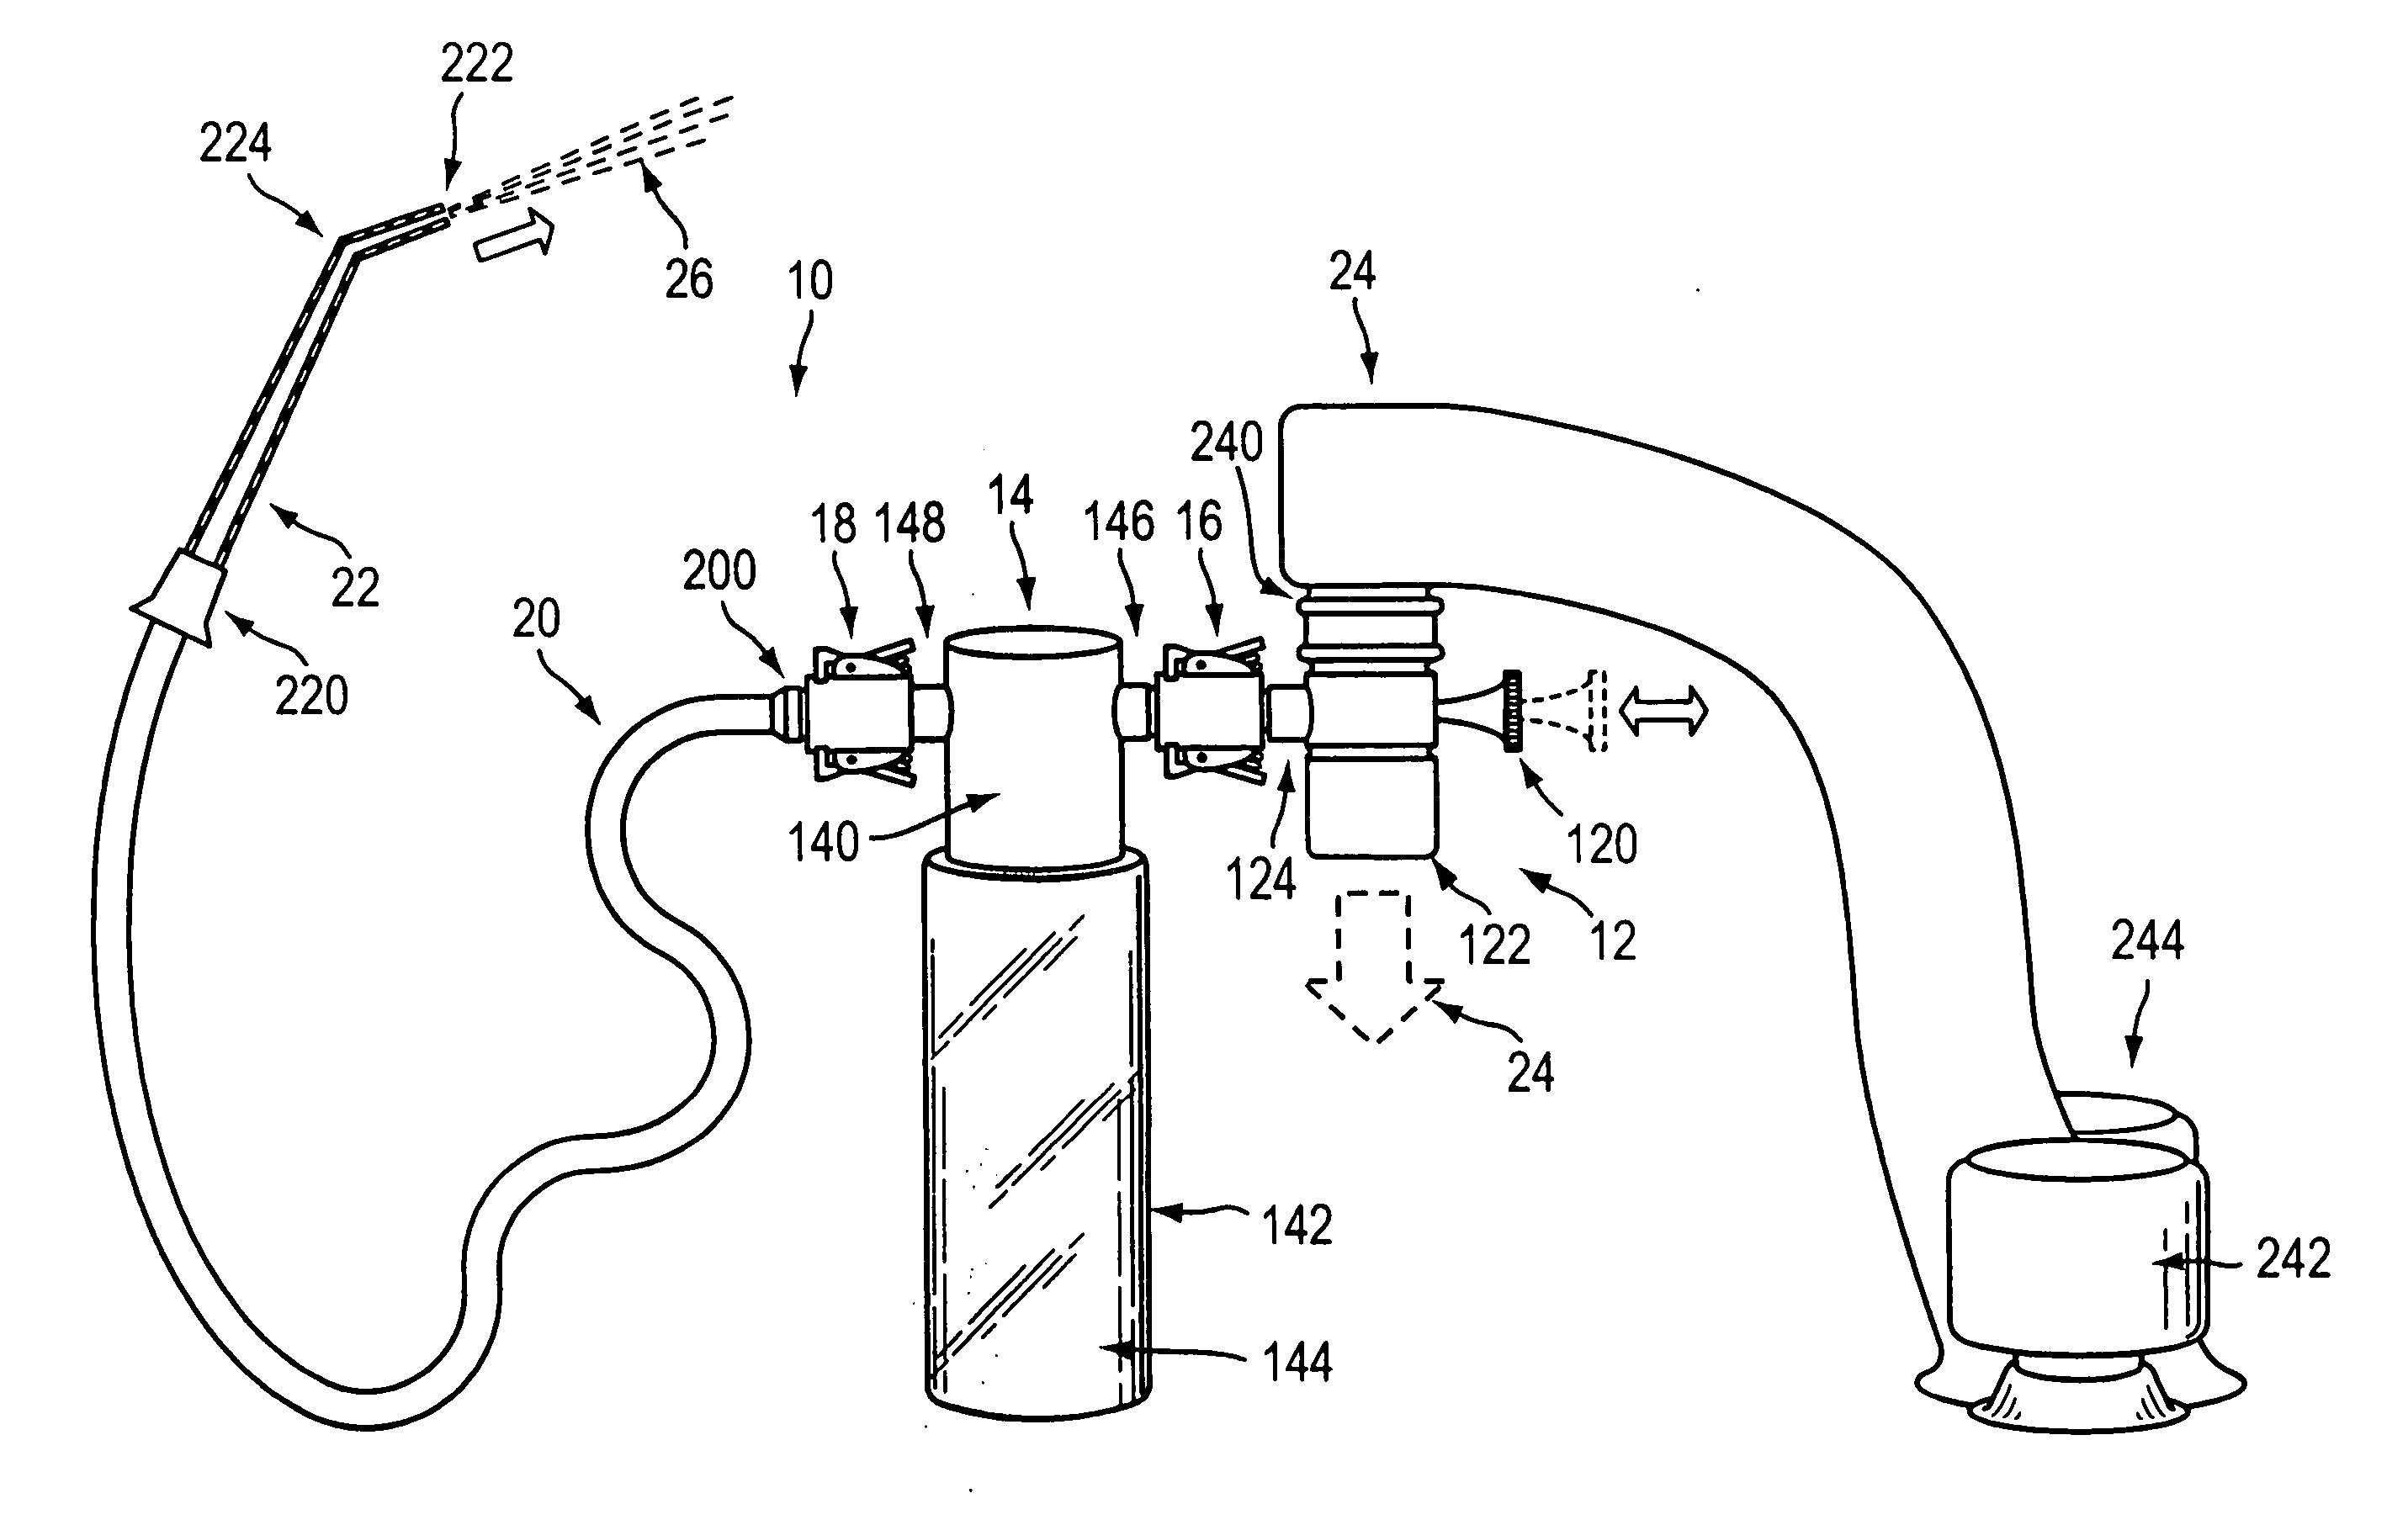 Coupling device for security coupling first and second elements